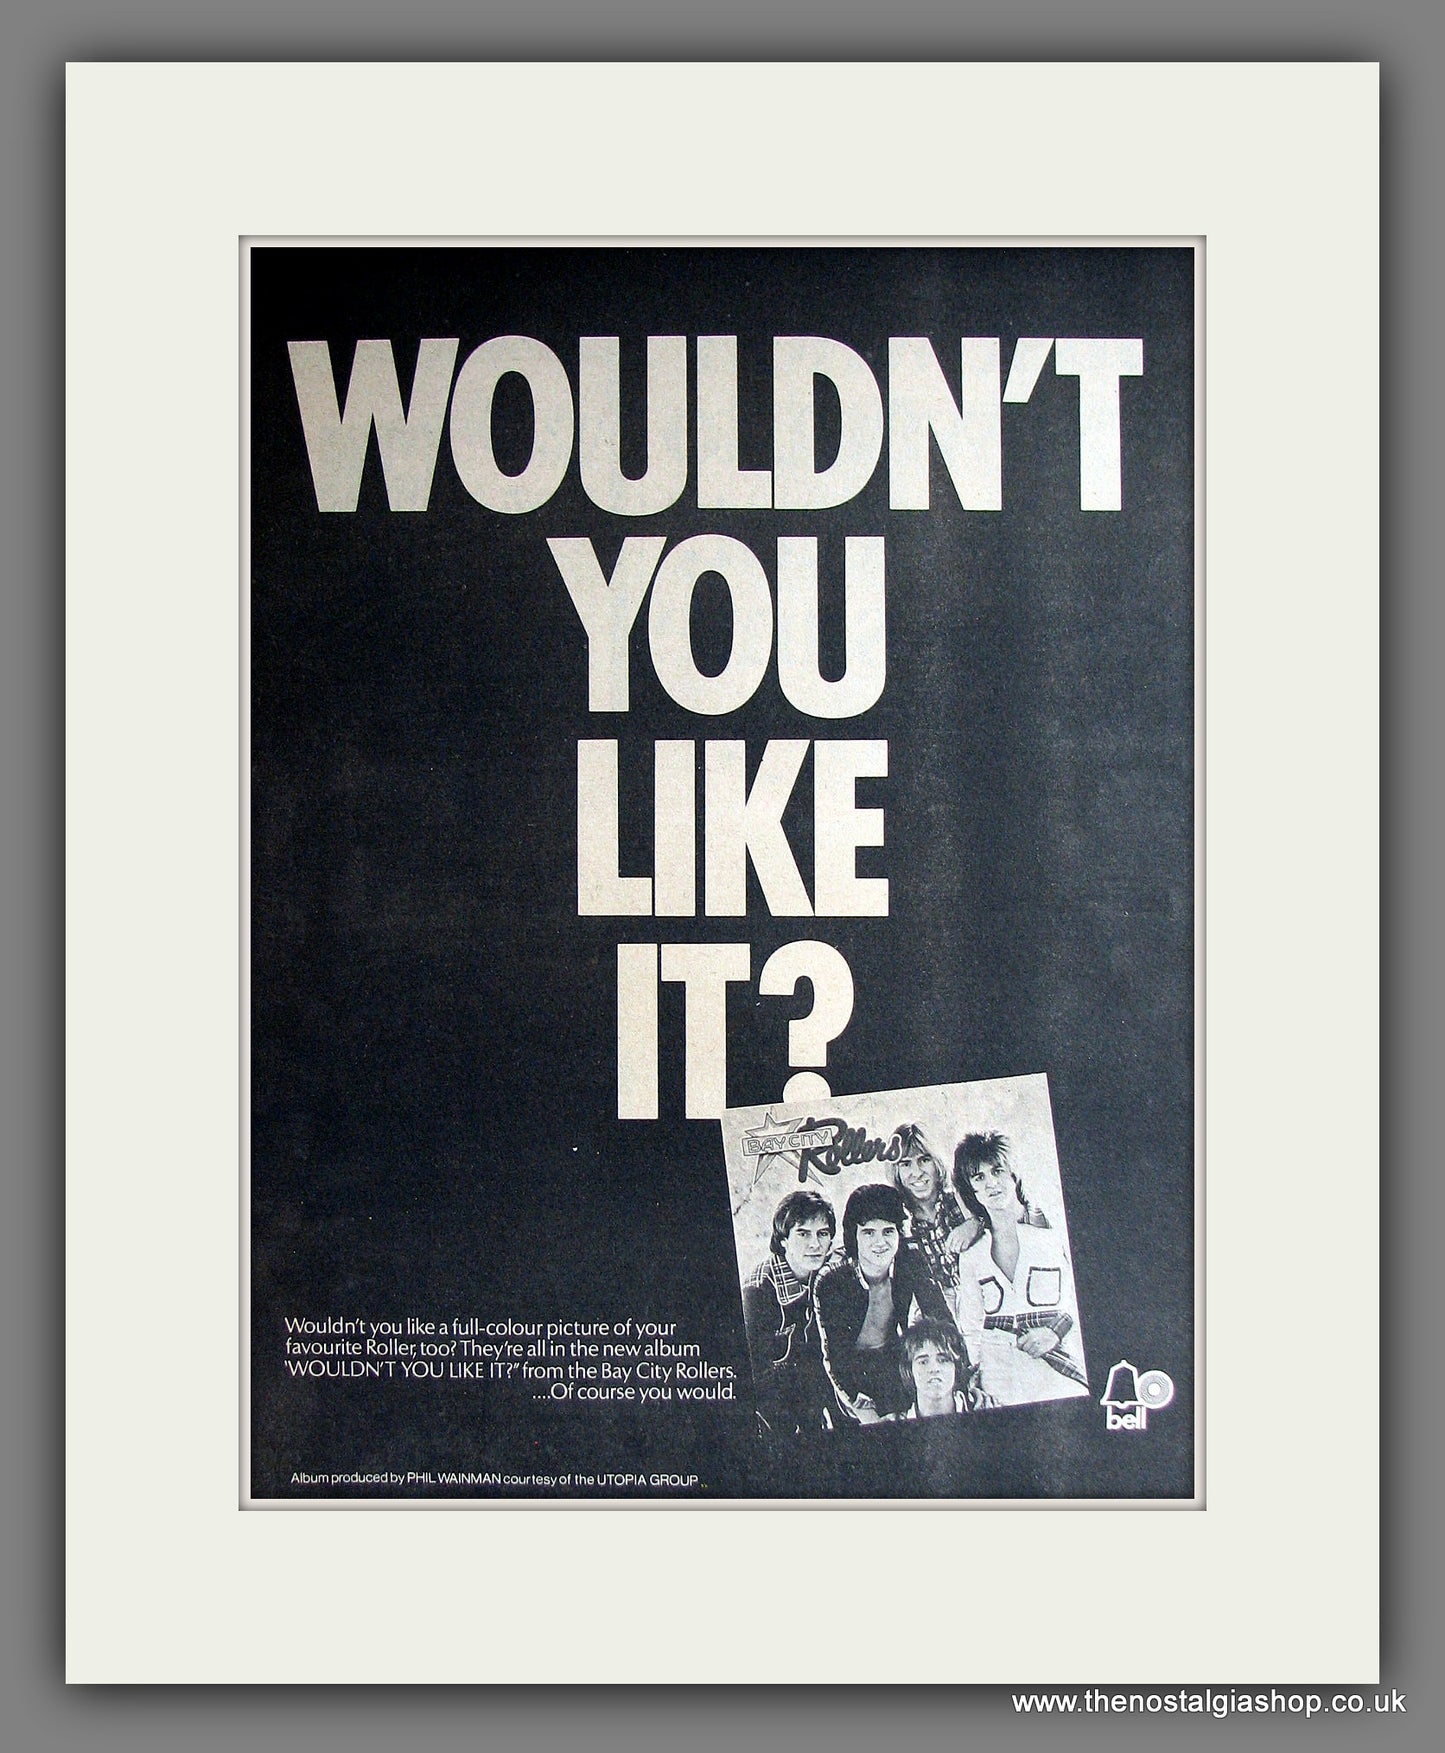 Bay City Rollers Wouldn't You Like It. Vintage Advert 1975 (ref AD14068)